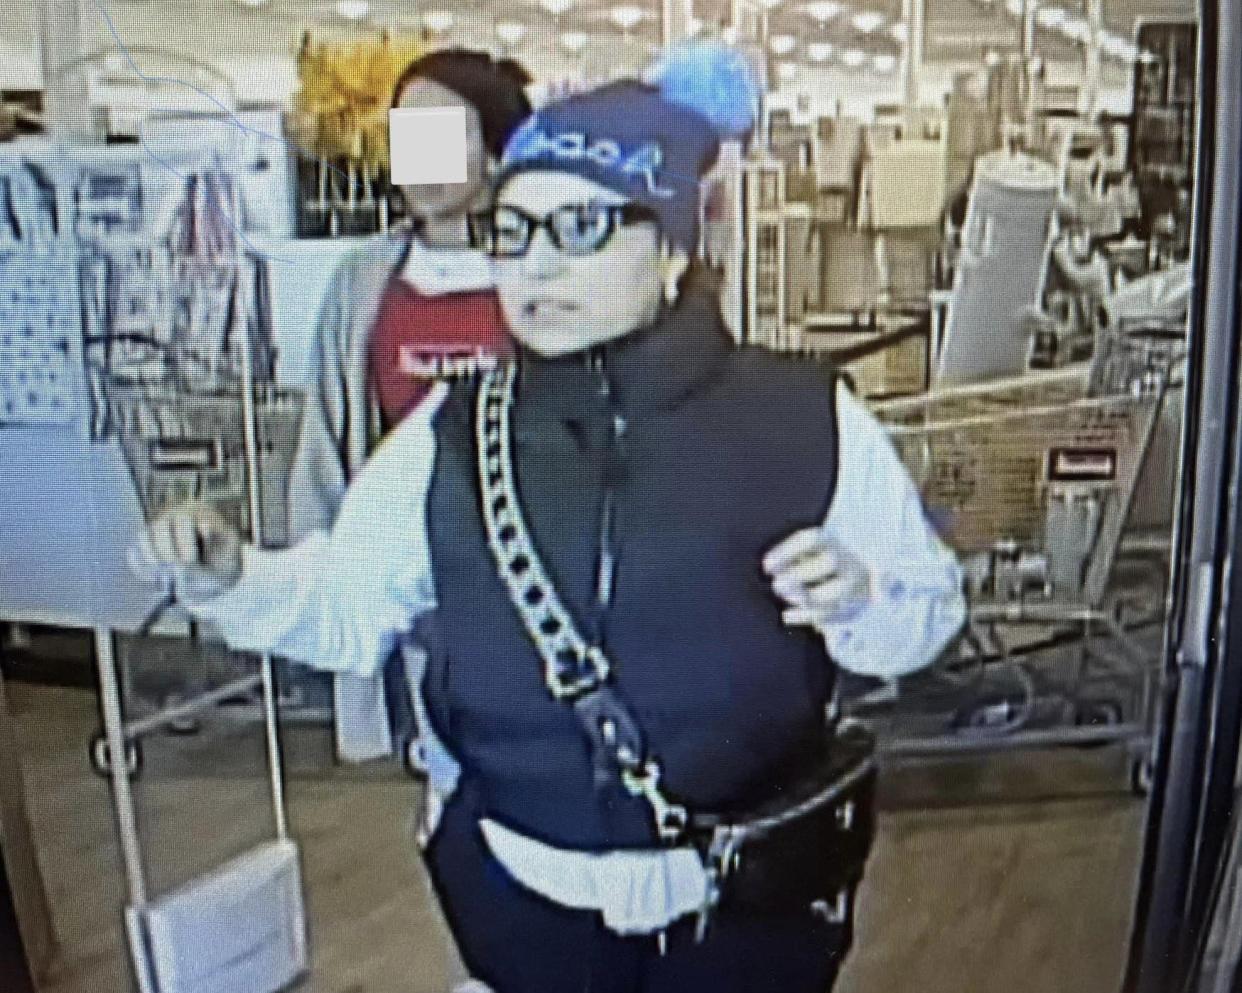 Norwell police are asking for the public's help in identifying the suspects they believe are responsible for several wallet thefts from purses in stores around town.